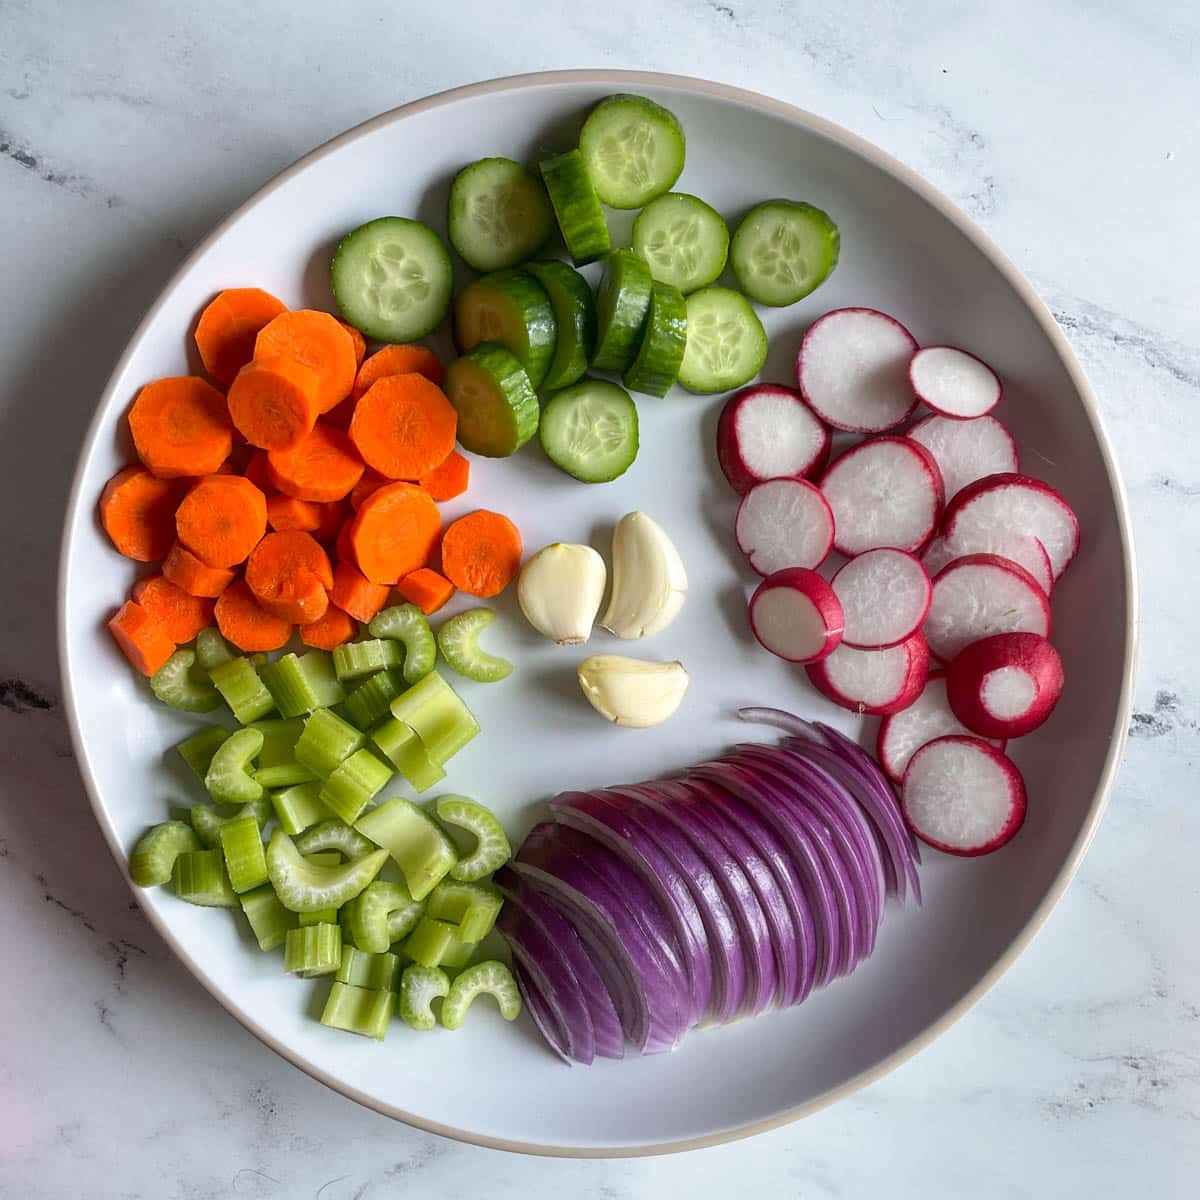 Sliced red onion, celery, carrot, cucmber, radish, and smashed garlic cloves sit on a white plate.